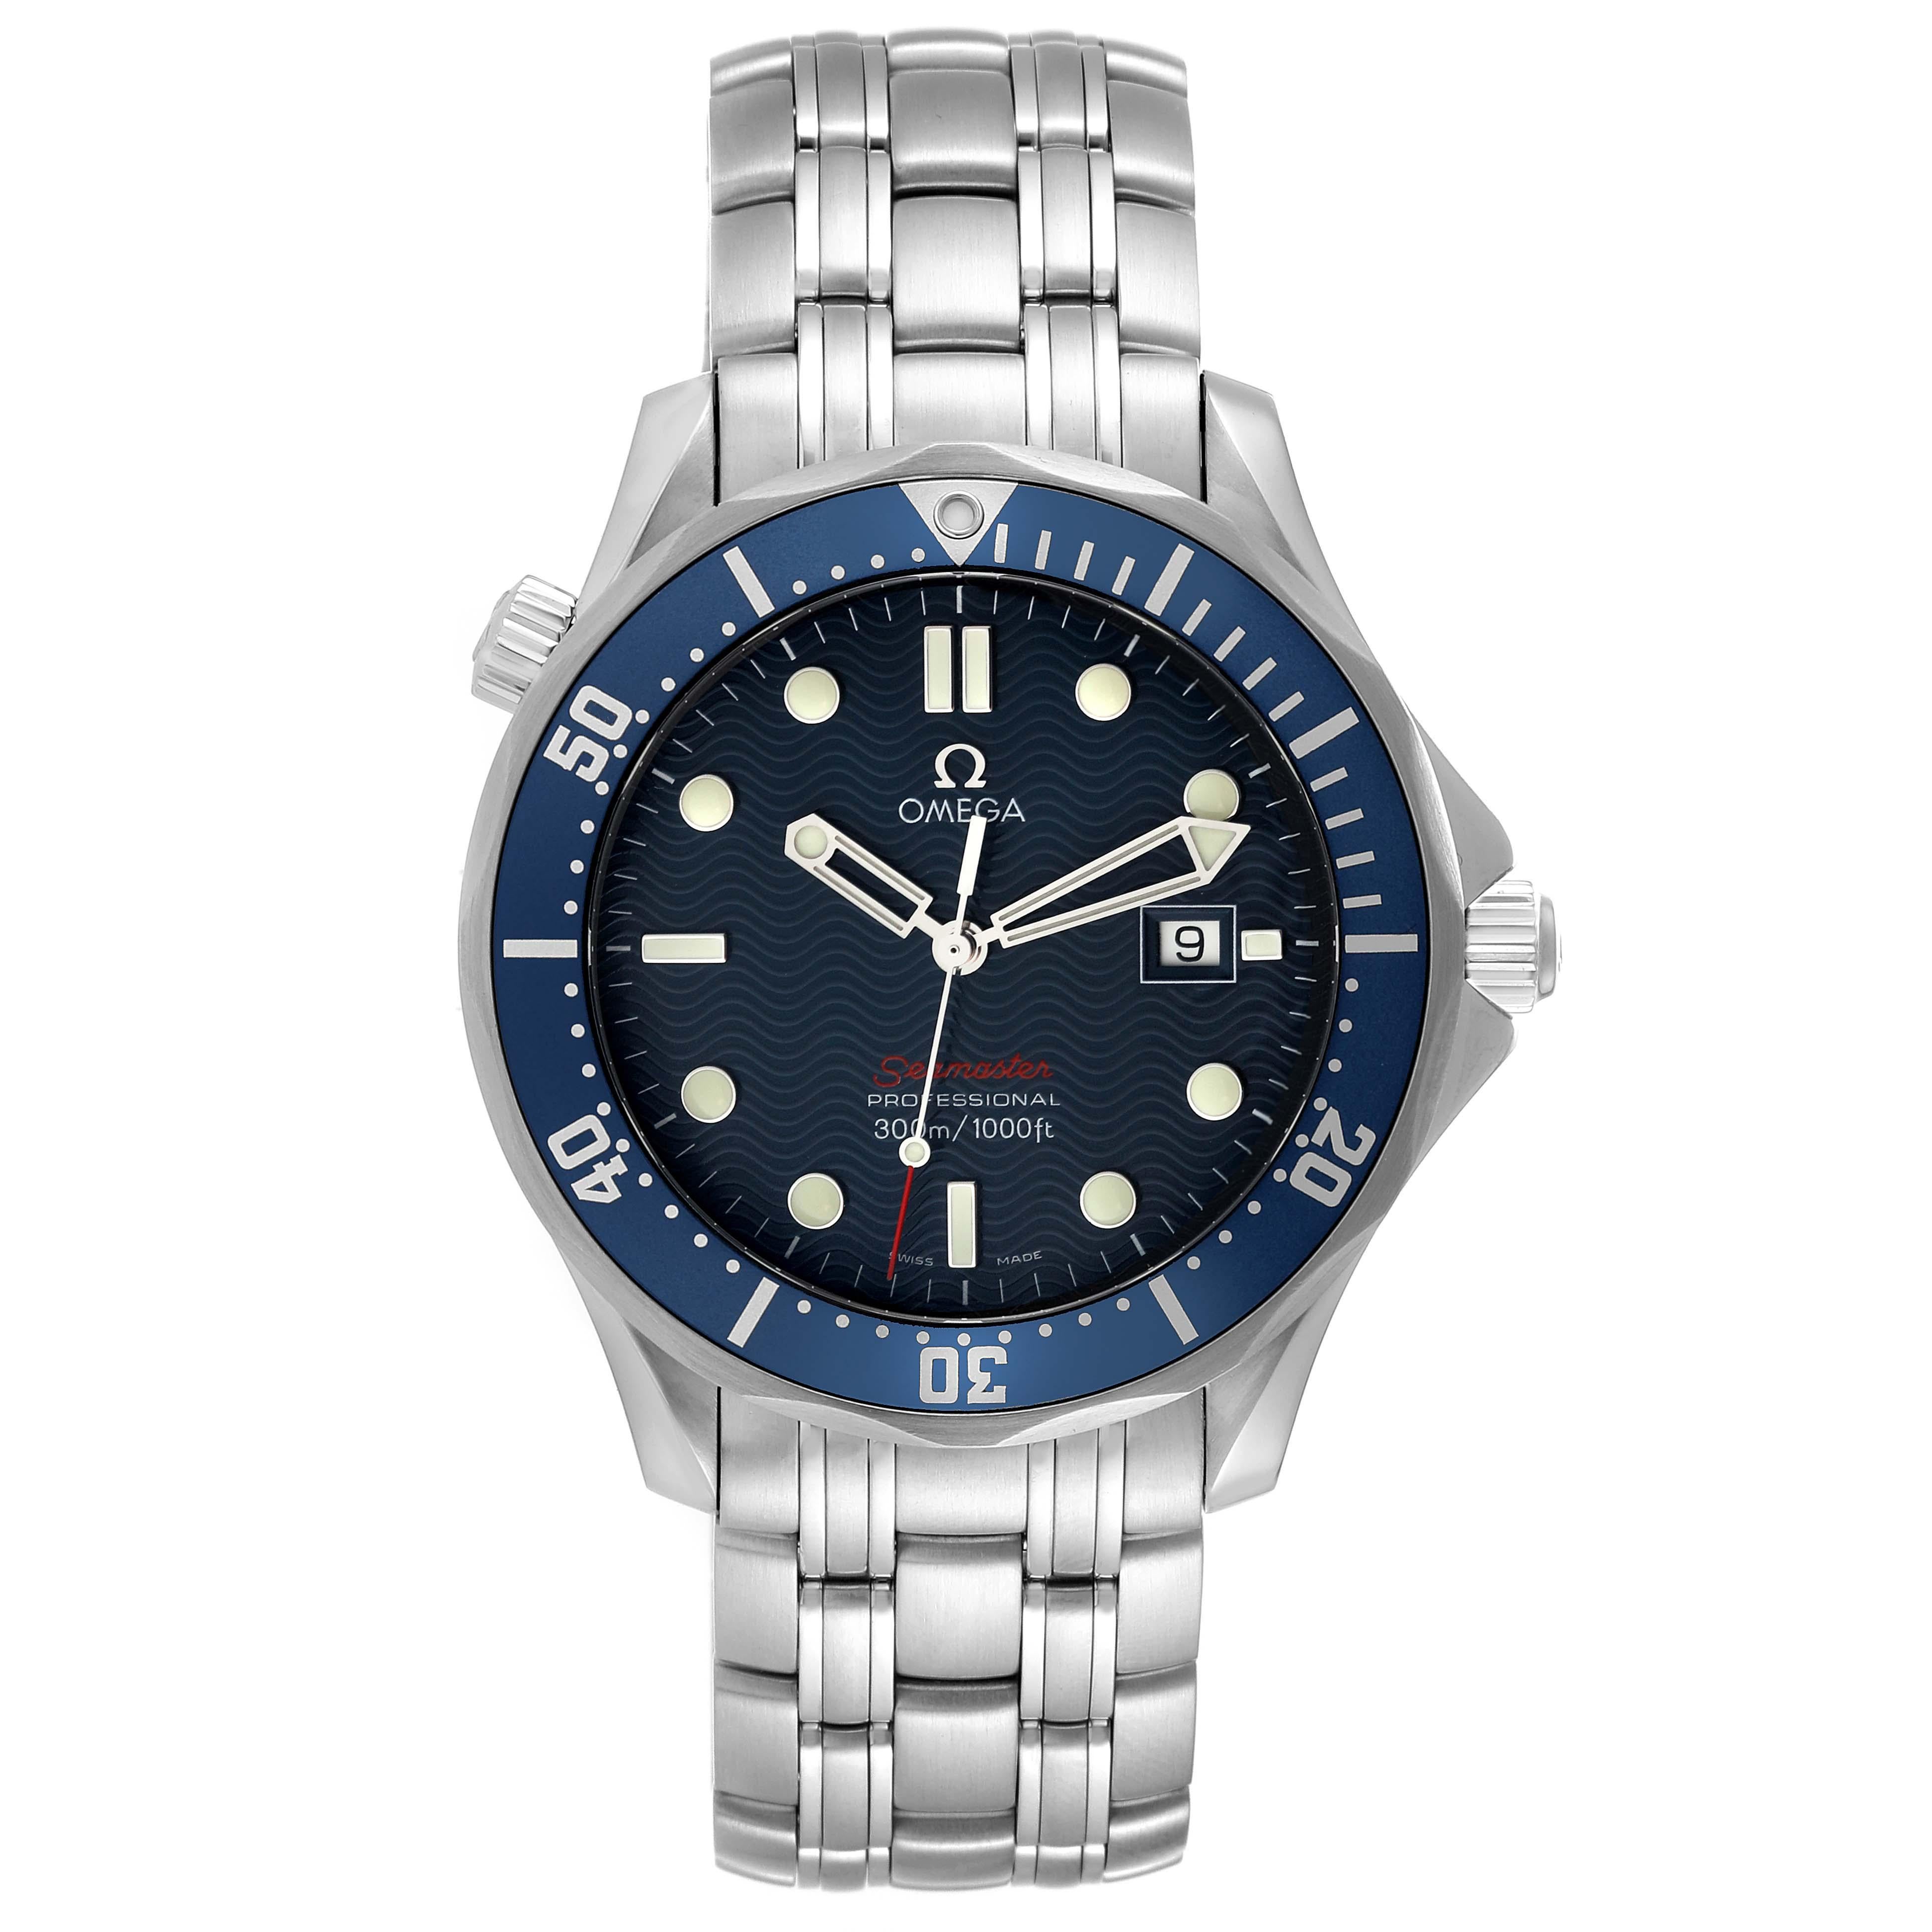 Omega Seamaster Bond 300M Blue Dial Steel Mens Watch 2221.80.00 Box Card. Quartz movement. Stainless steel case 41.0 mm in diameter. Omega logo on the crown. Blue unidirectional rotating bezel. Scratch resistant sapphire crystal. Blue wave decor